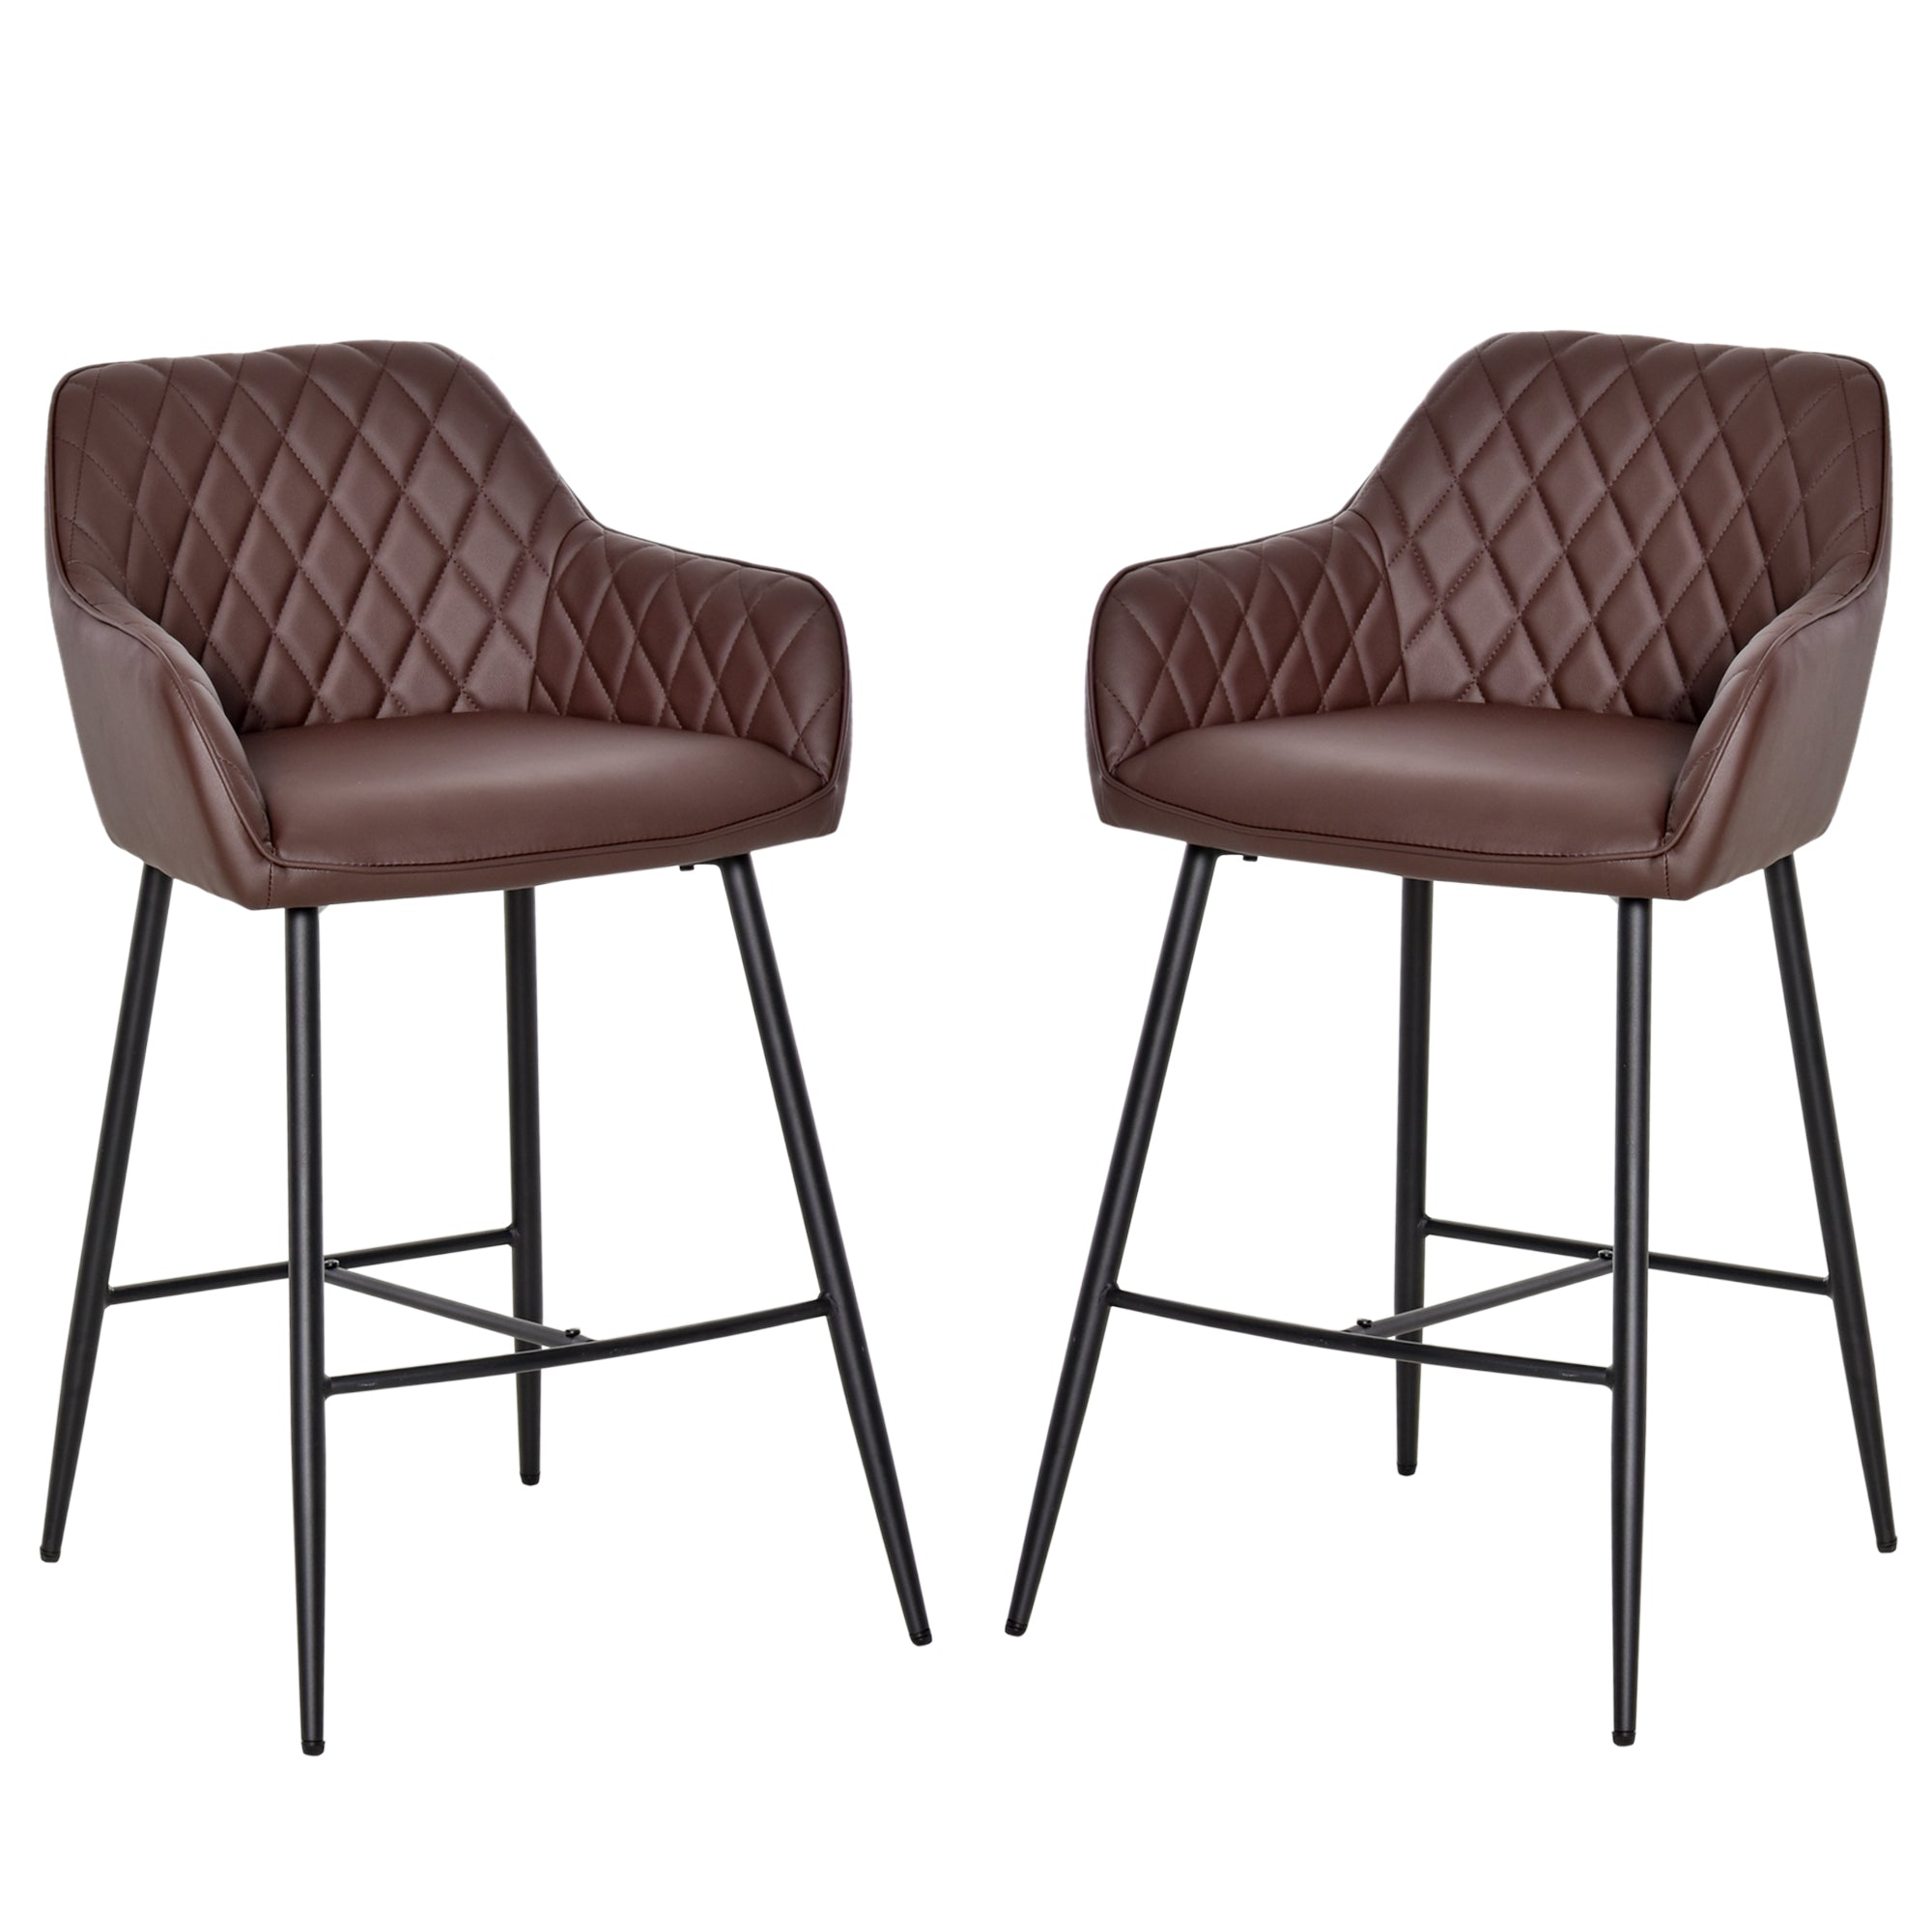 Set of 2 Bar stools With Backs Retro PU Leather Bar Chairs w/ Footrest Metal Frame Comfort Support Stylish Dining Seating Home Brown-0